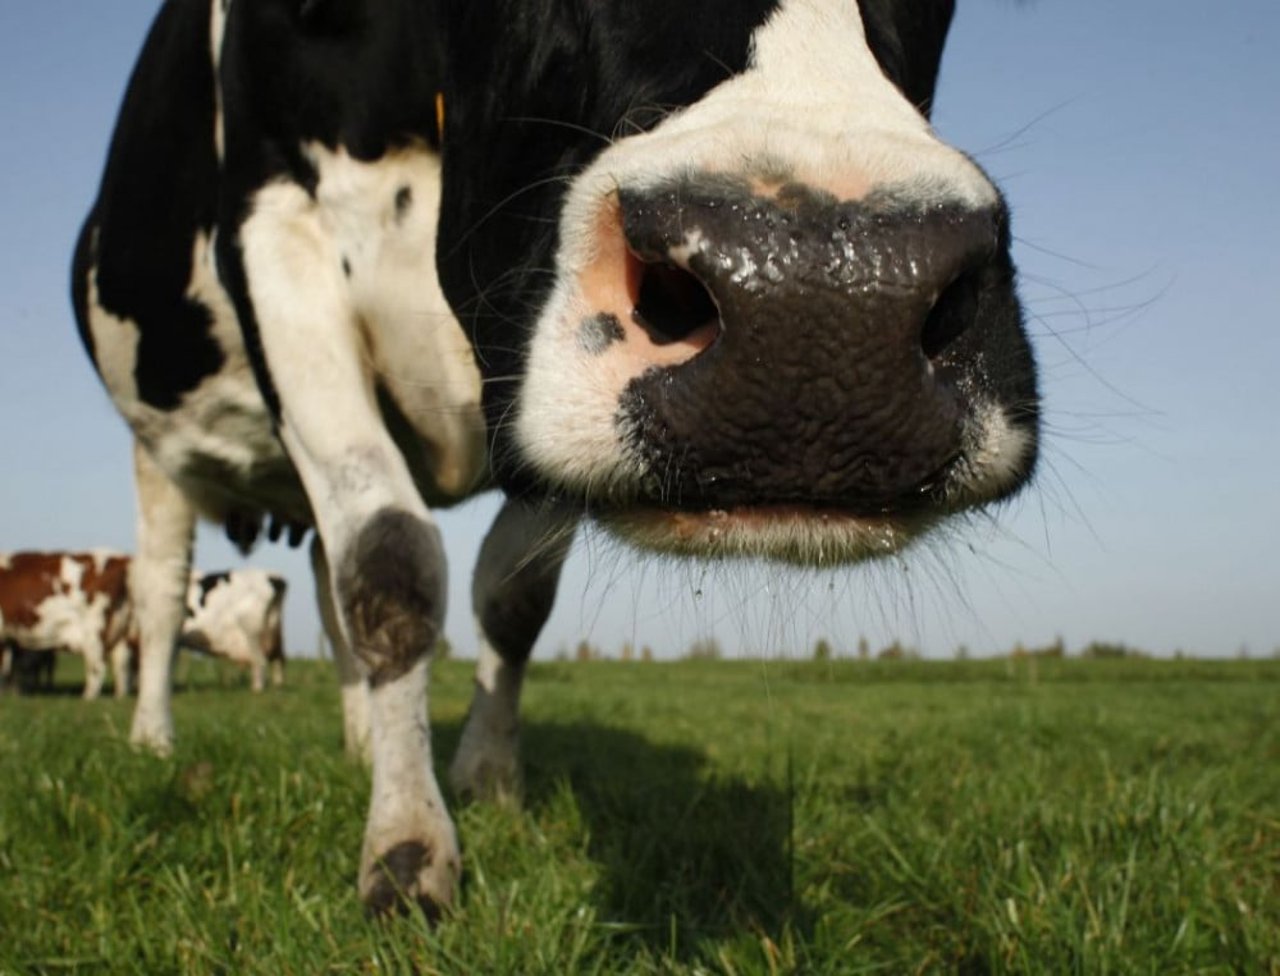 dairy_report_cows_on_grass2_0_0